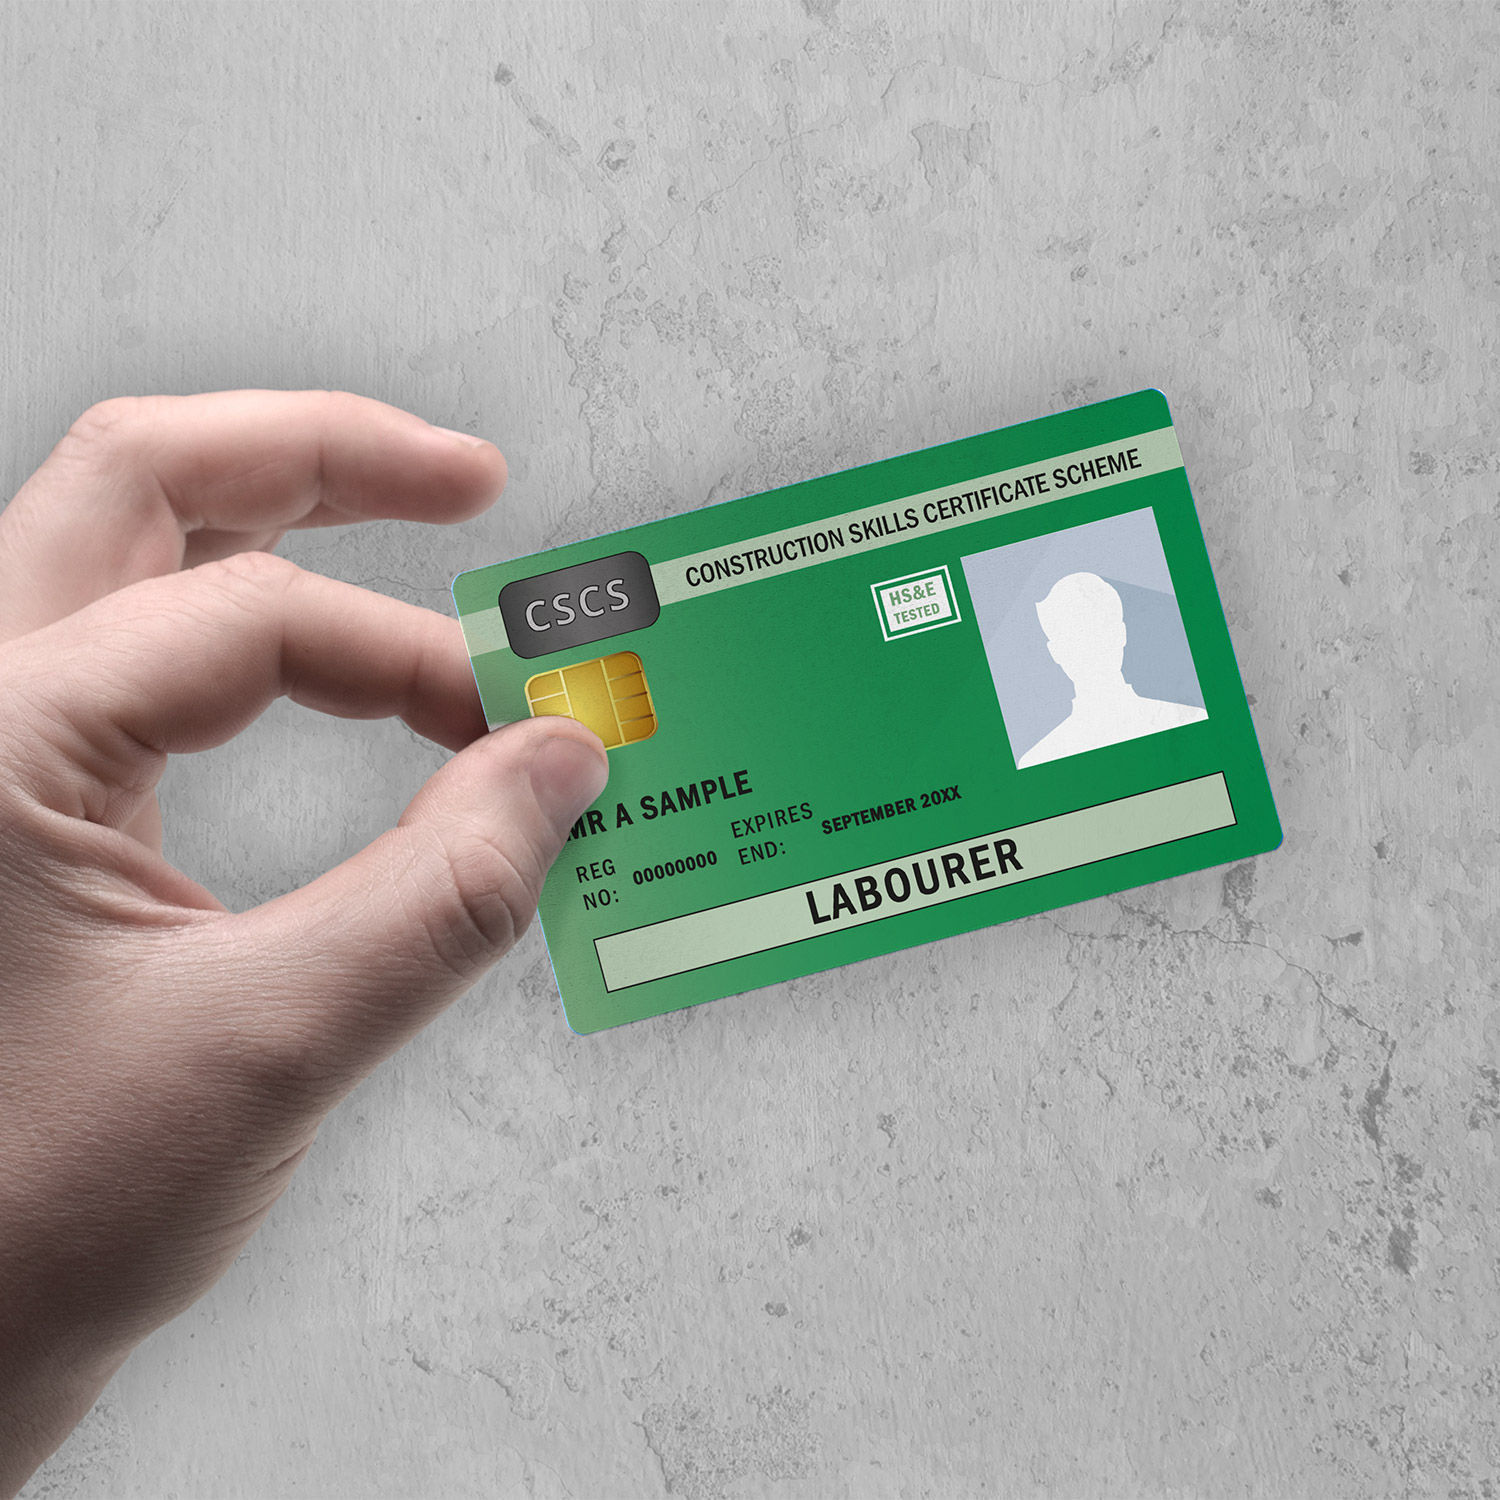 How To Apply For The CSCS Green Card Online